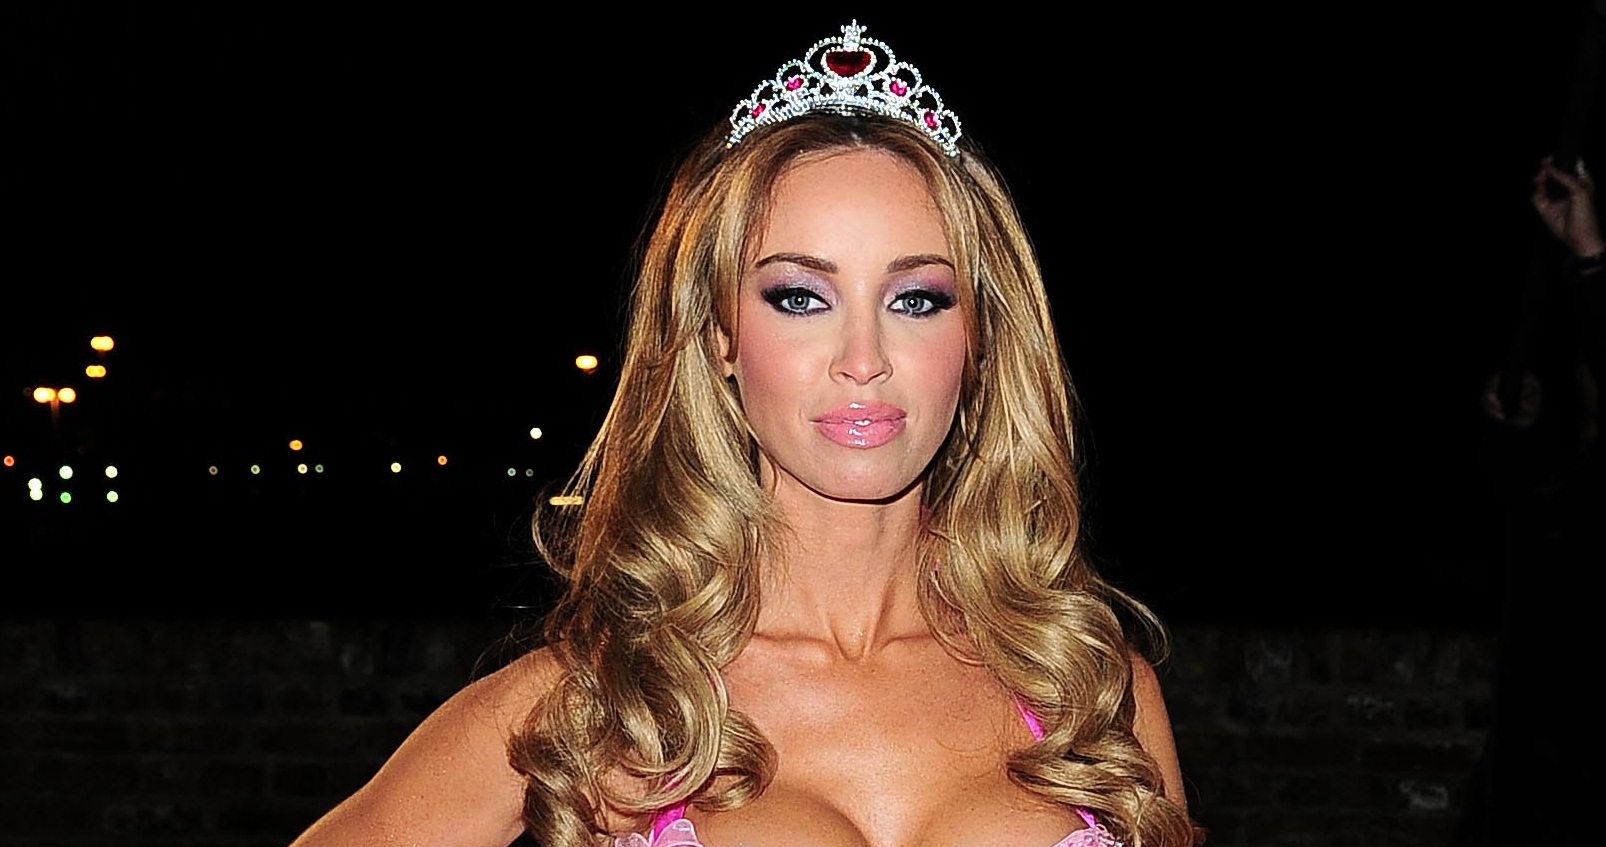 The Only Way Is Essexs Lauren Pope In A Princess Dress Dare To Wear